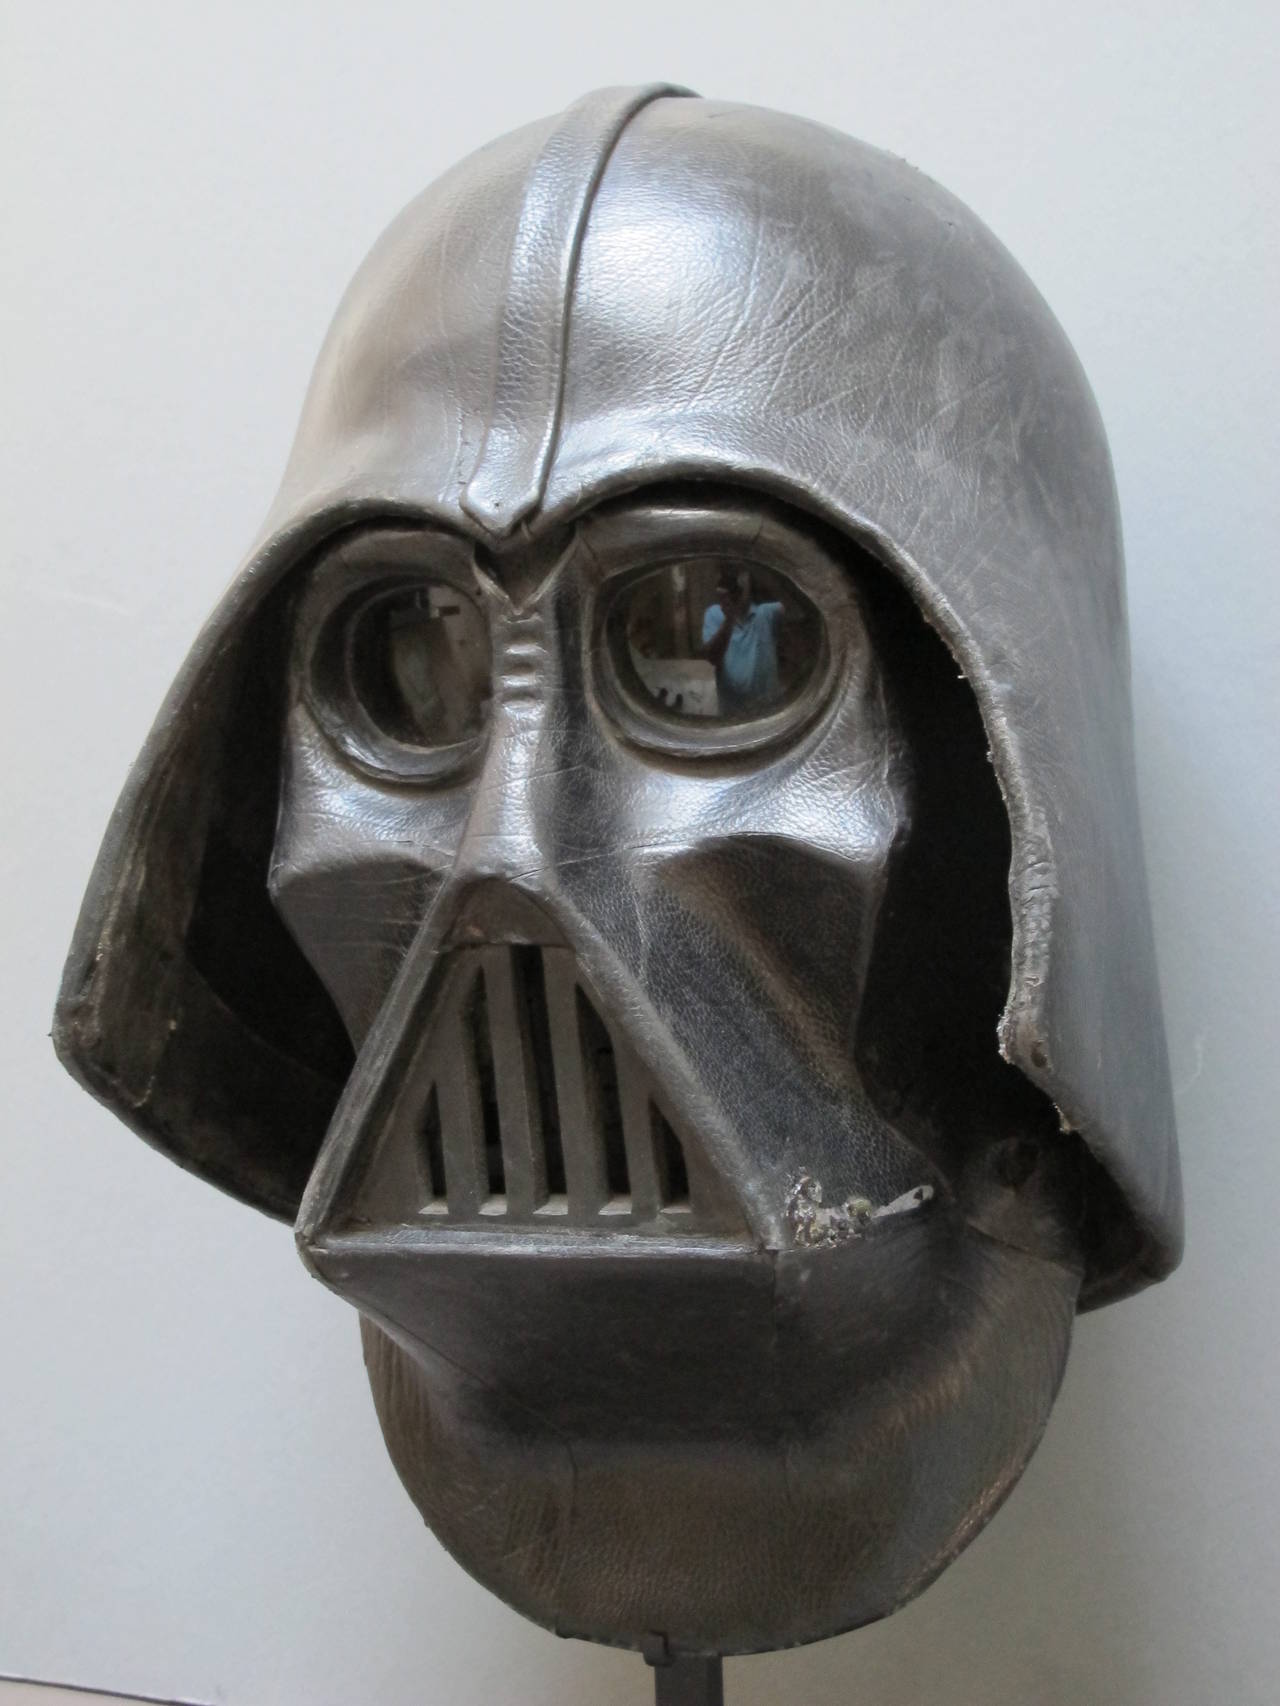 Extremely well made mask and helmet with leather covering. Made to be worn with straps in the back of the mask and padding. Possibly an early Star Wars costume made for the yearly gatherings. Correctly proportioned and made durable with attention to